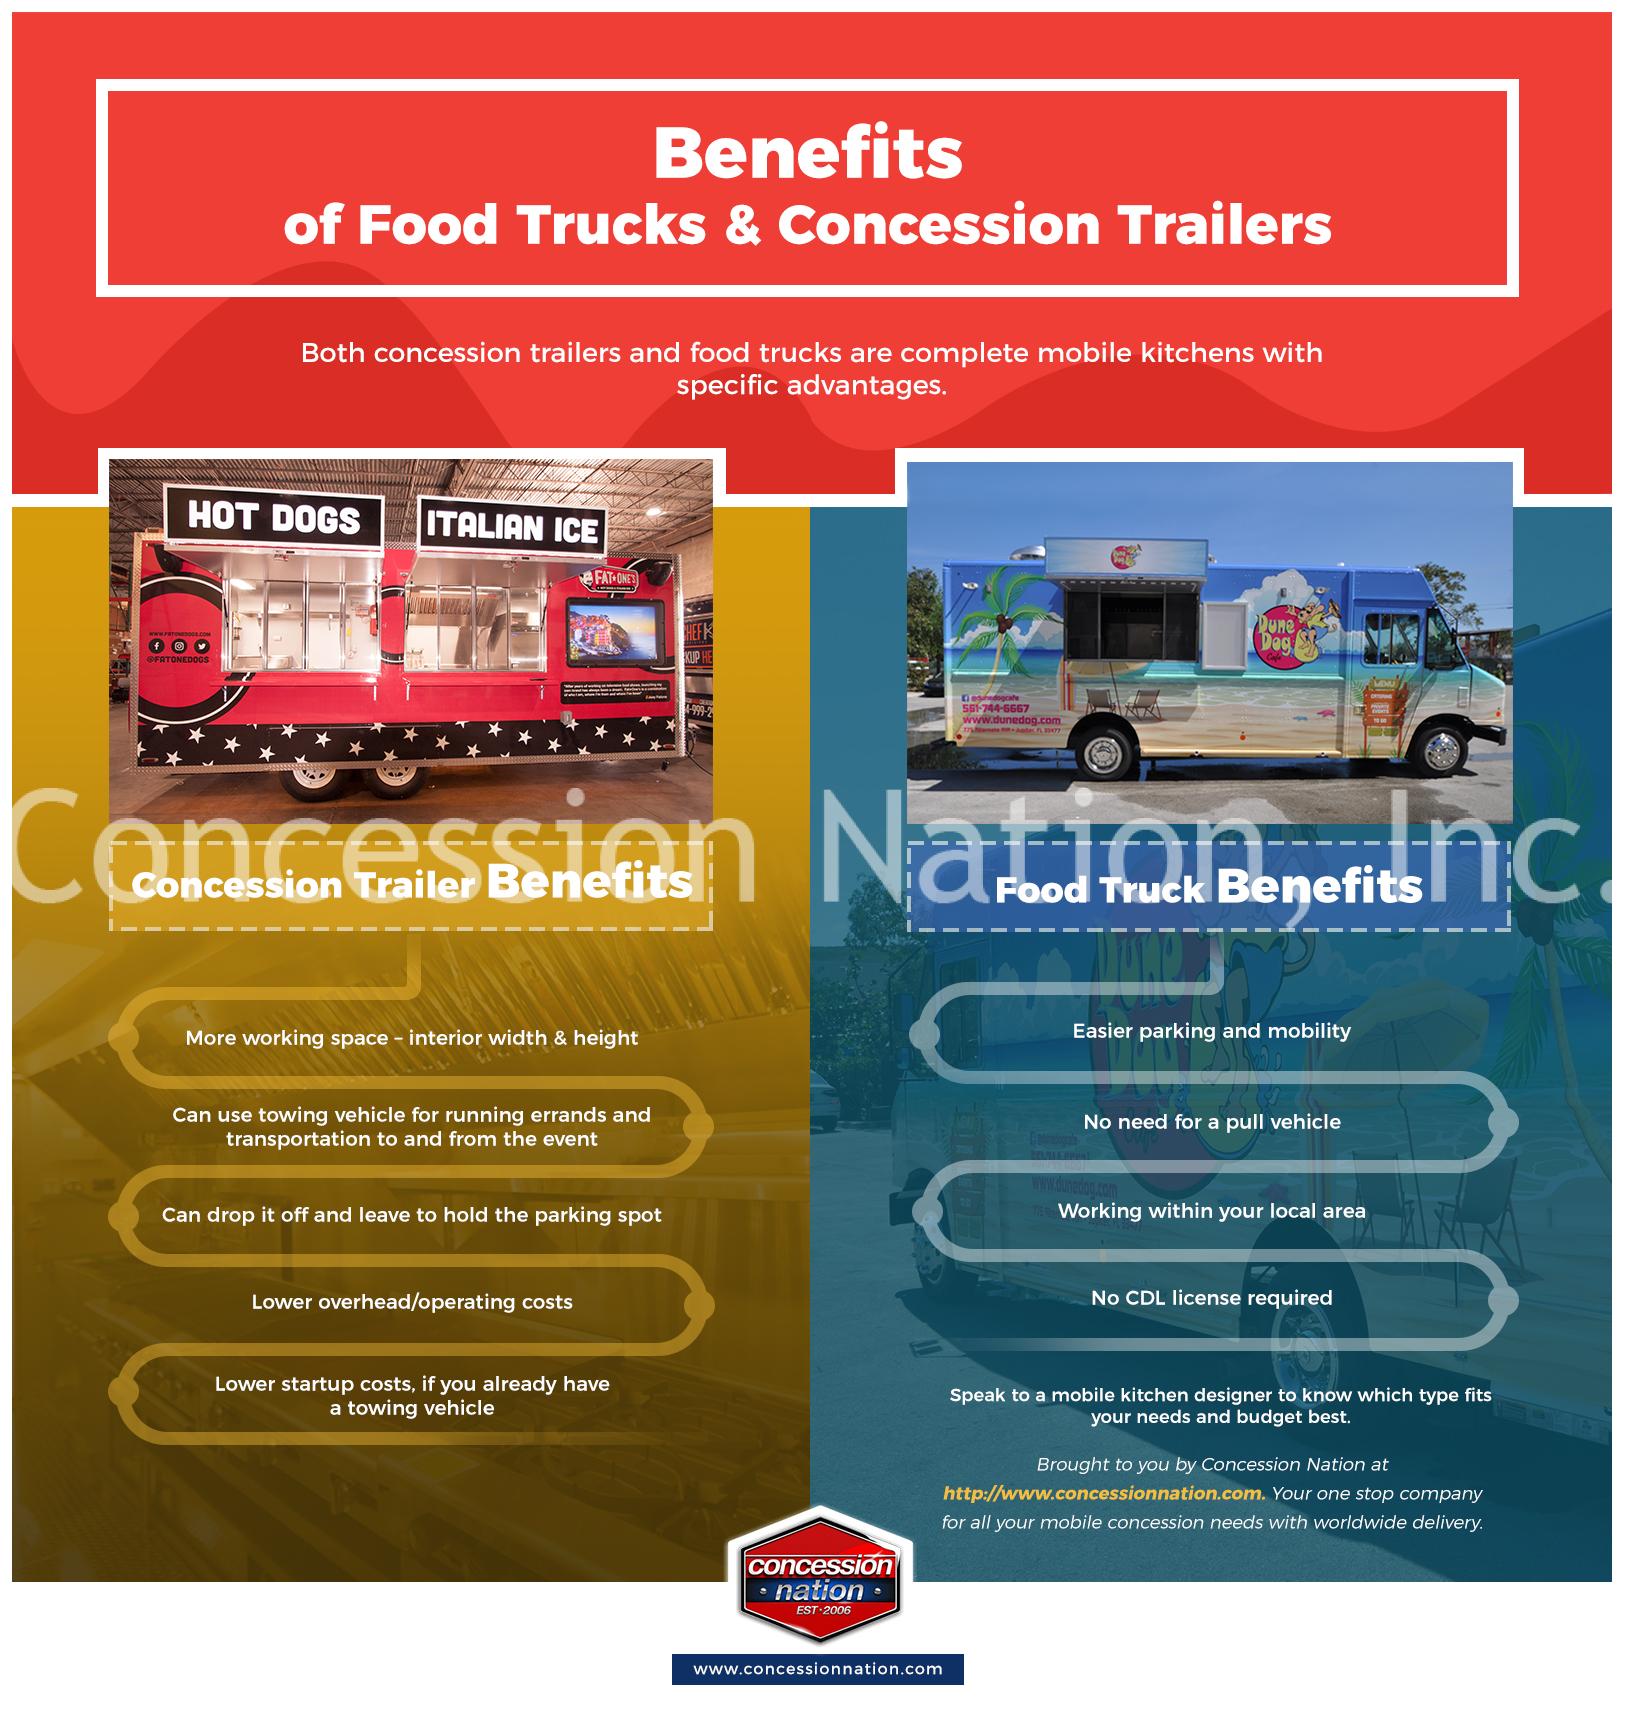 Food Trucks and Concession Trailers